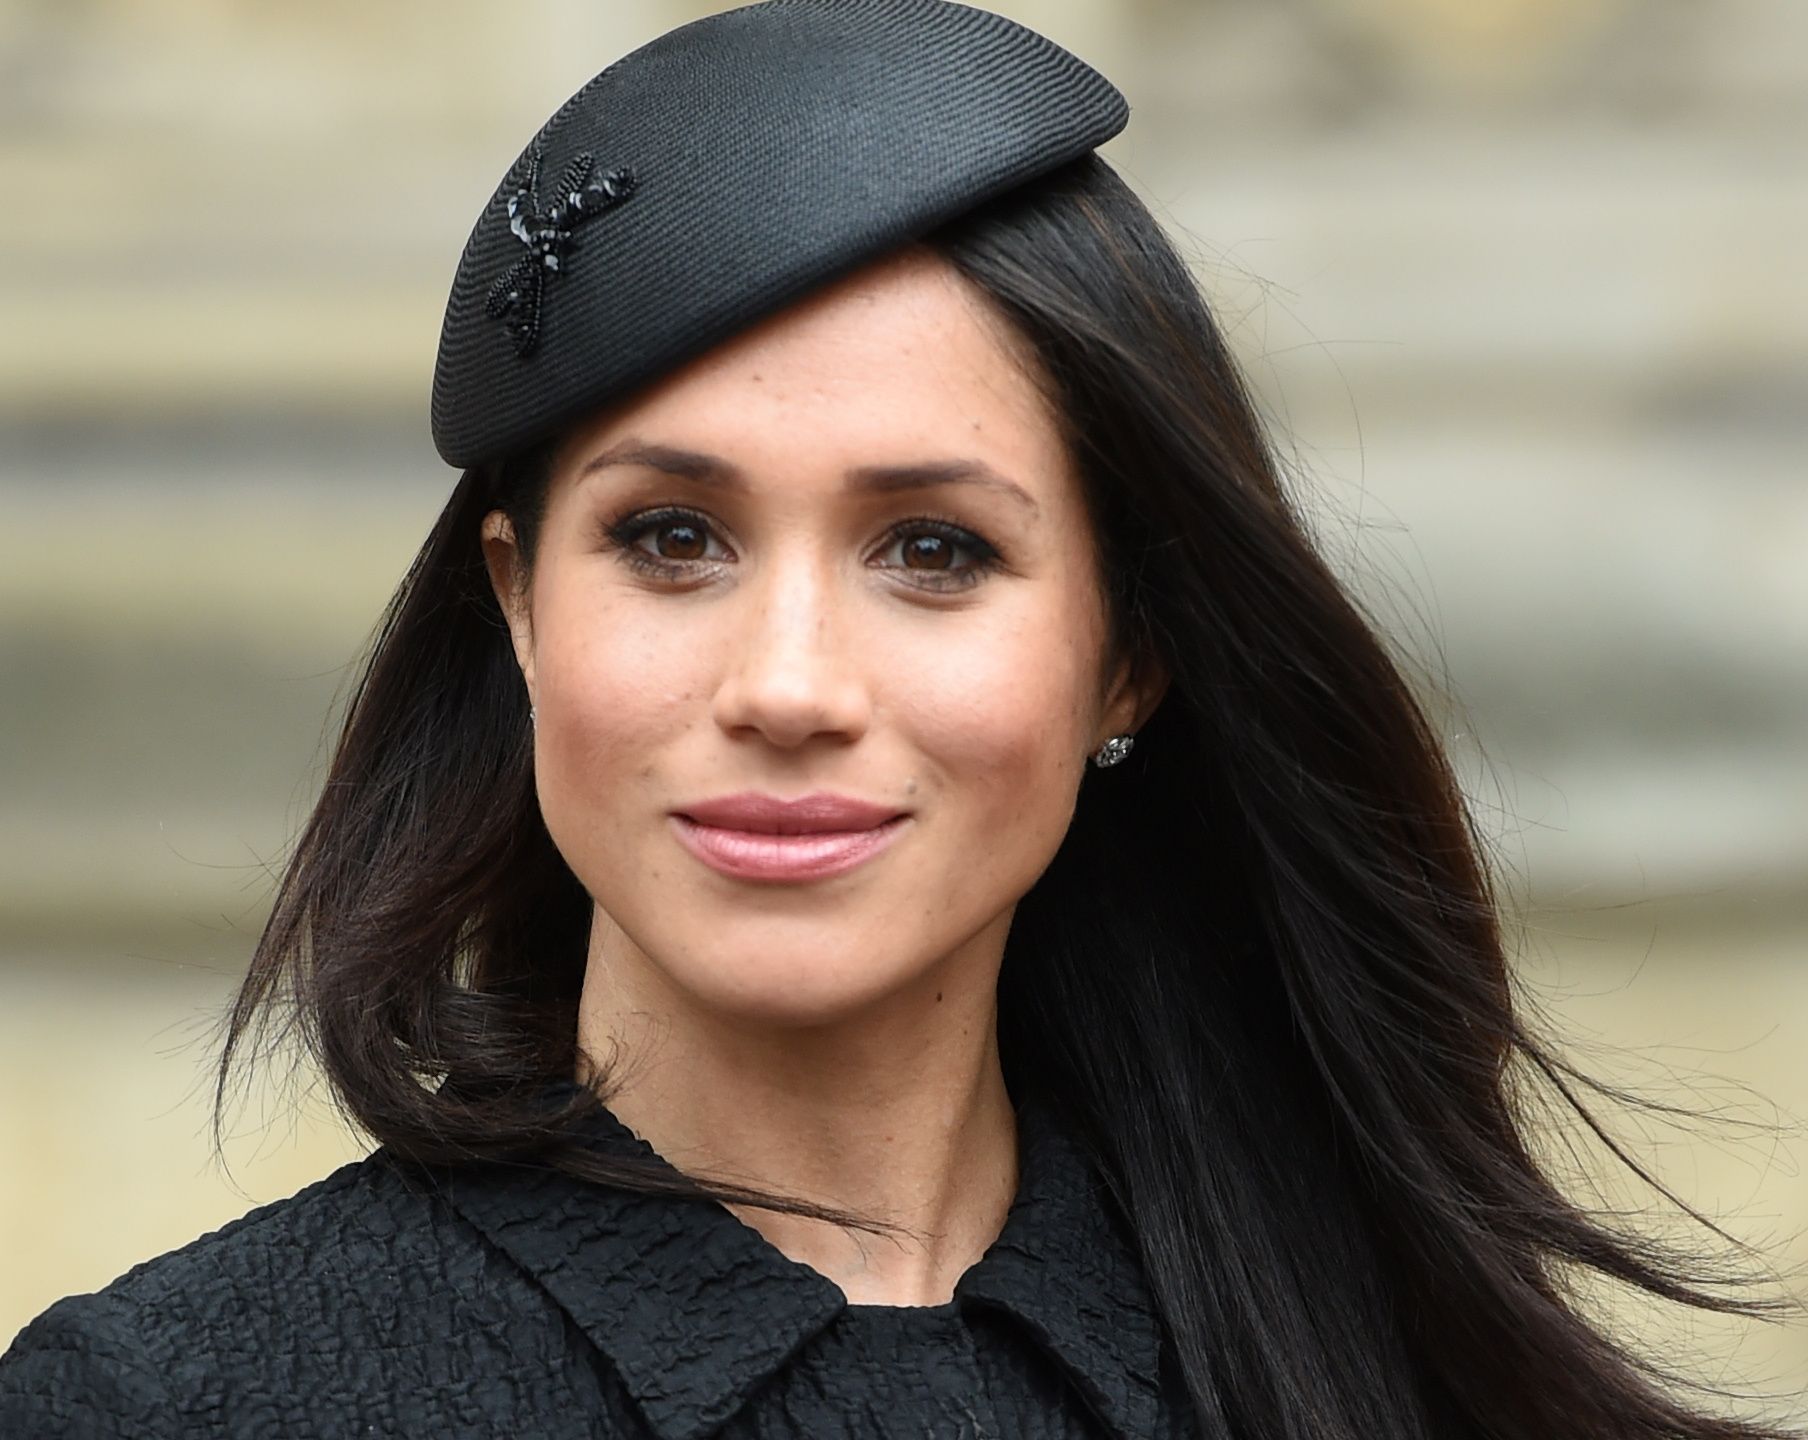 Meghan Markle, the fiancee of Britain’s Prince Harry, attends a Service of Thanksgiving and Commemoration on ANZAC Day at Westminster Abbey in London